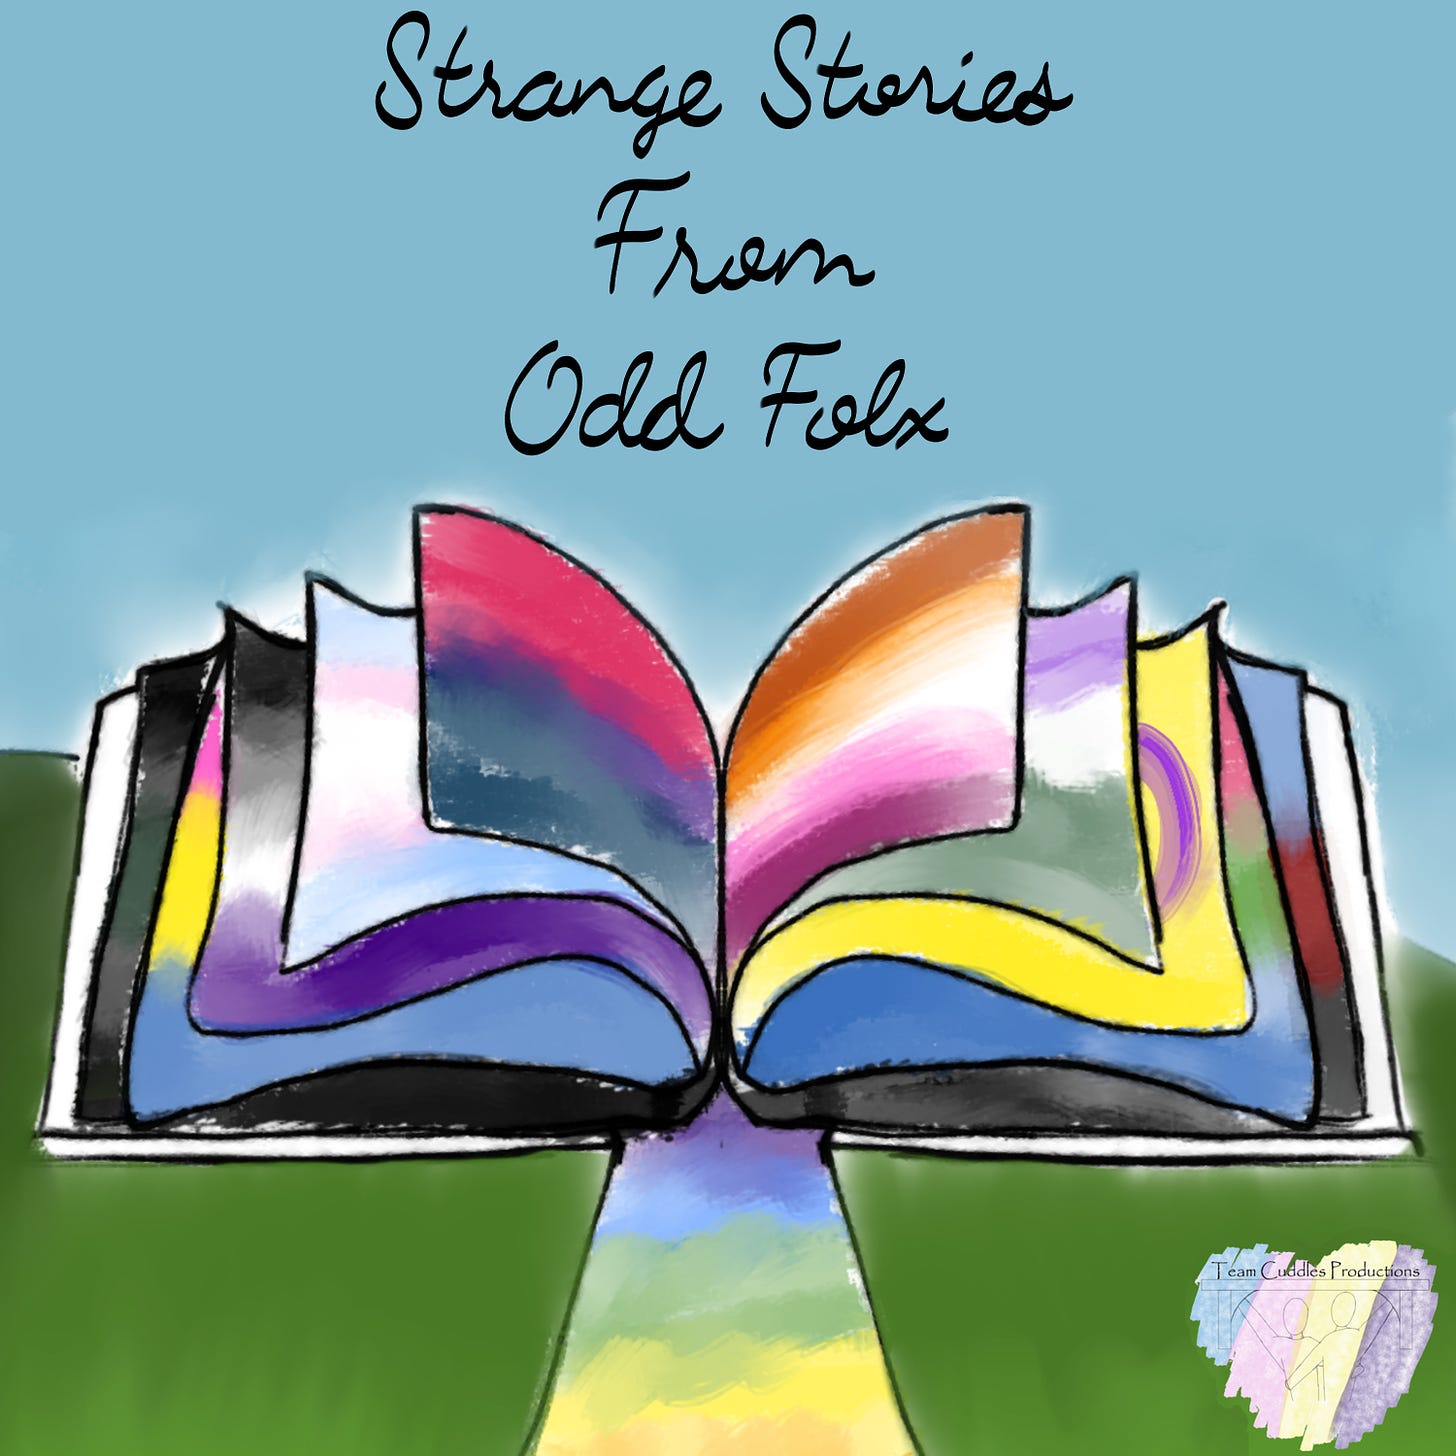 A square graphic. The background is blue sky and green grass, with a multi-coloured path leading to a book, its pages open and coloured various queer flag colours. Aboce this is the title: Strange Stories from Odd Folx